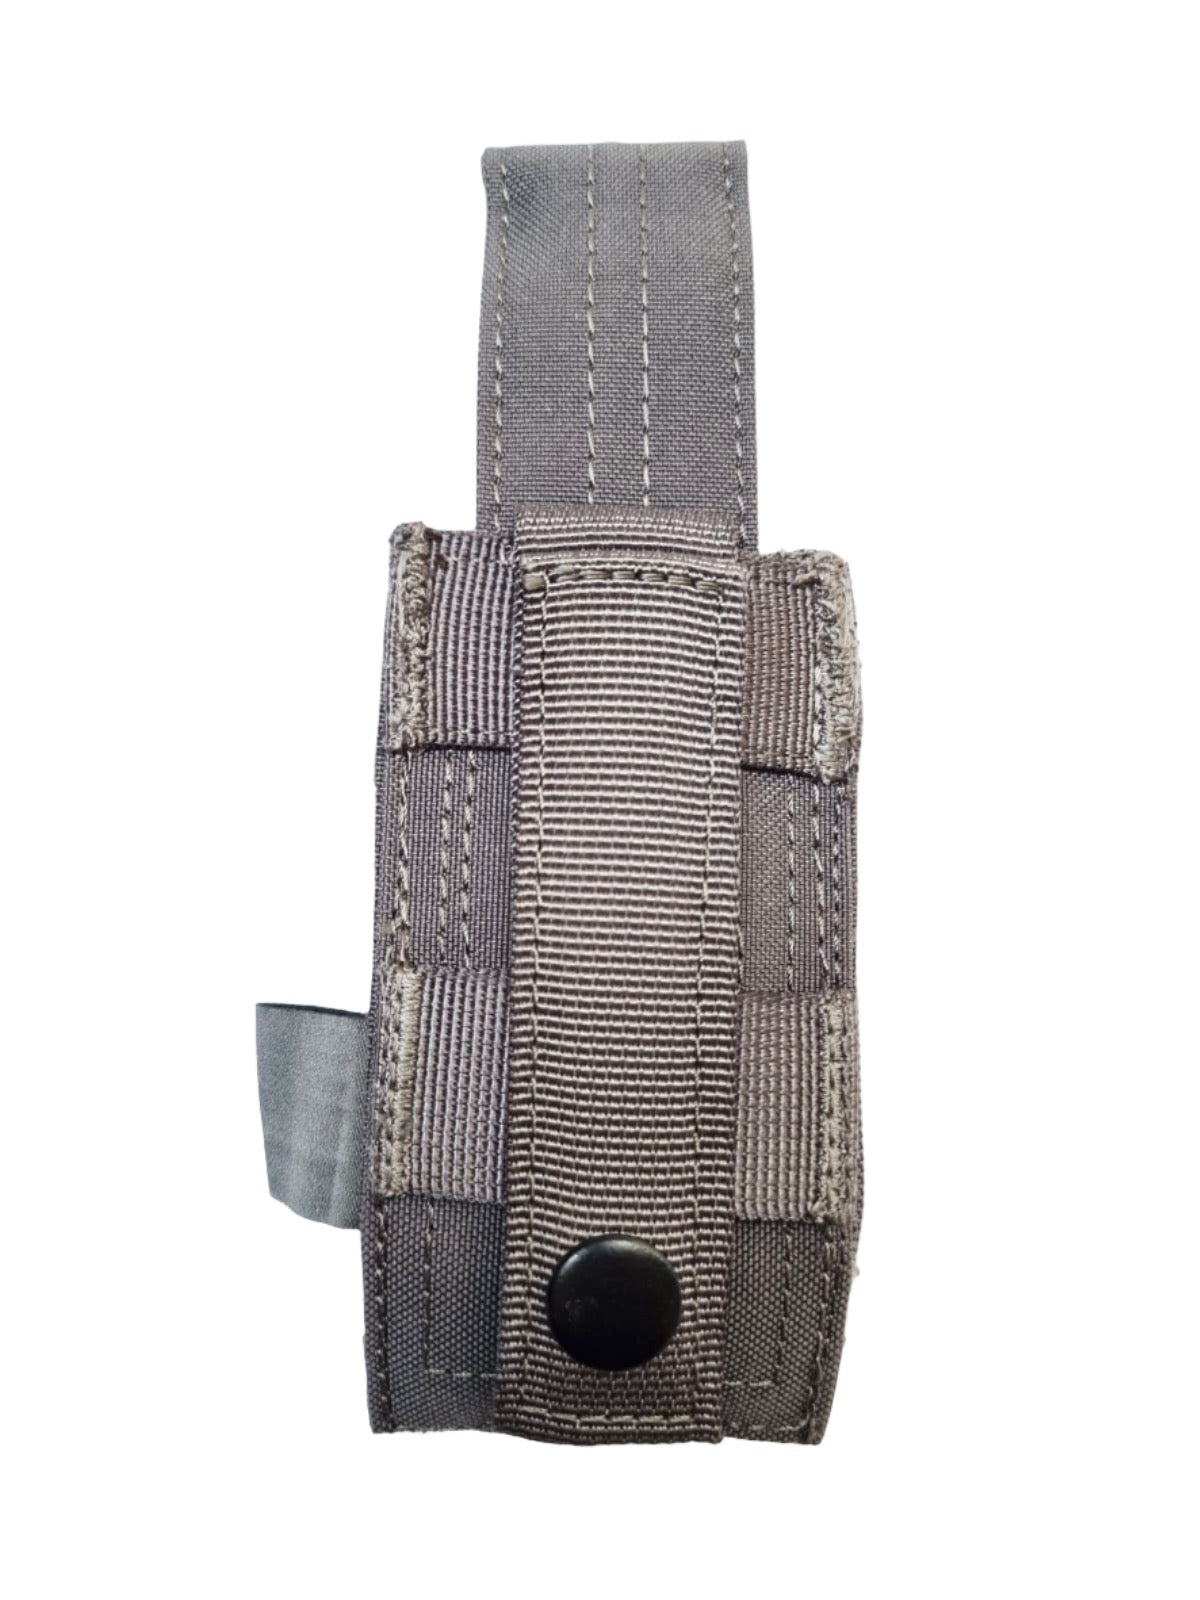 SHE-23029 GRIPTAC SINGLE PISTOL MAG POUCH WOLF GREY